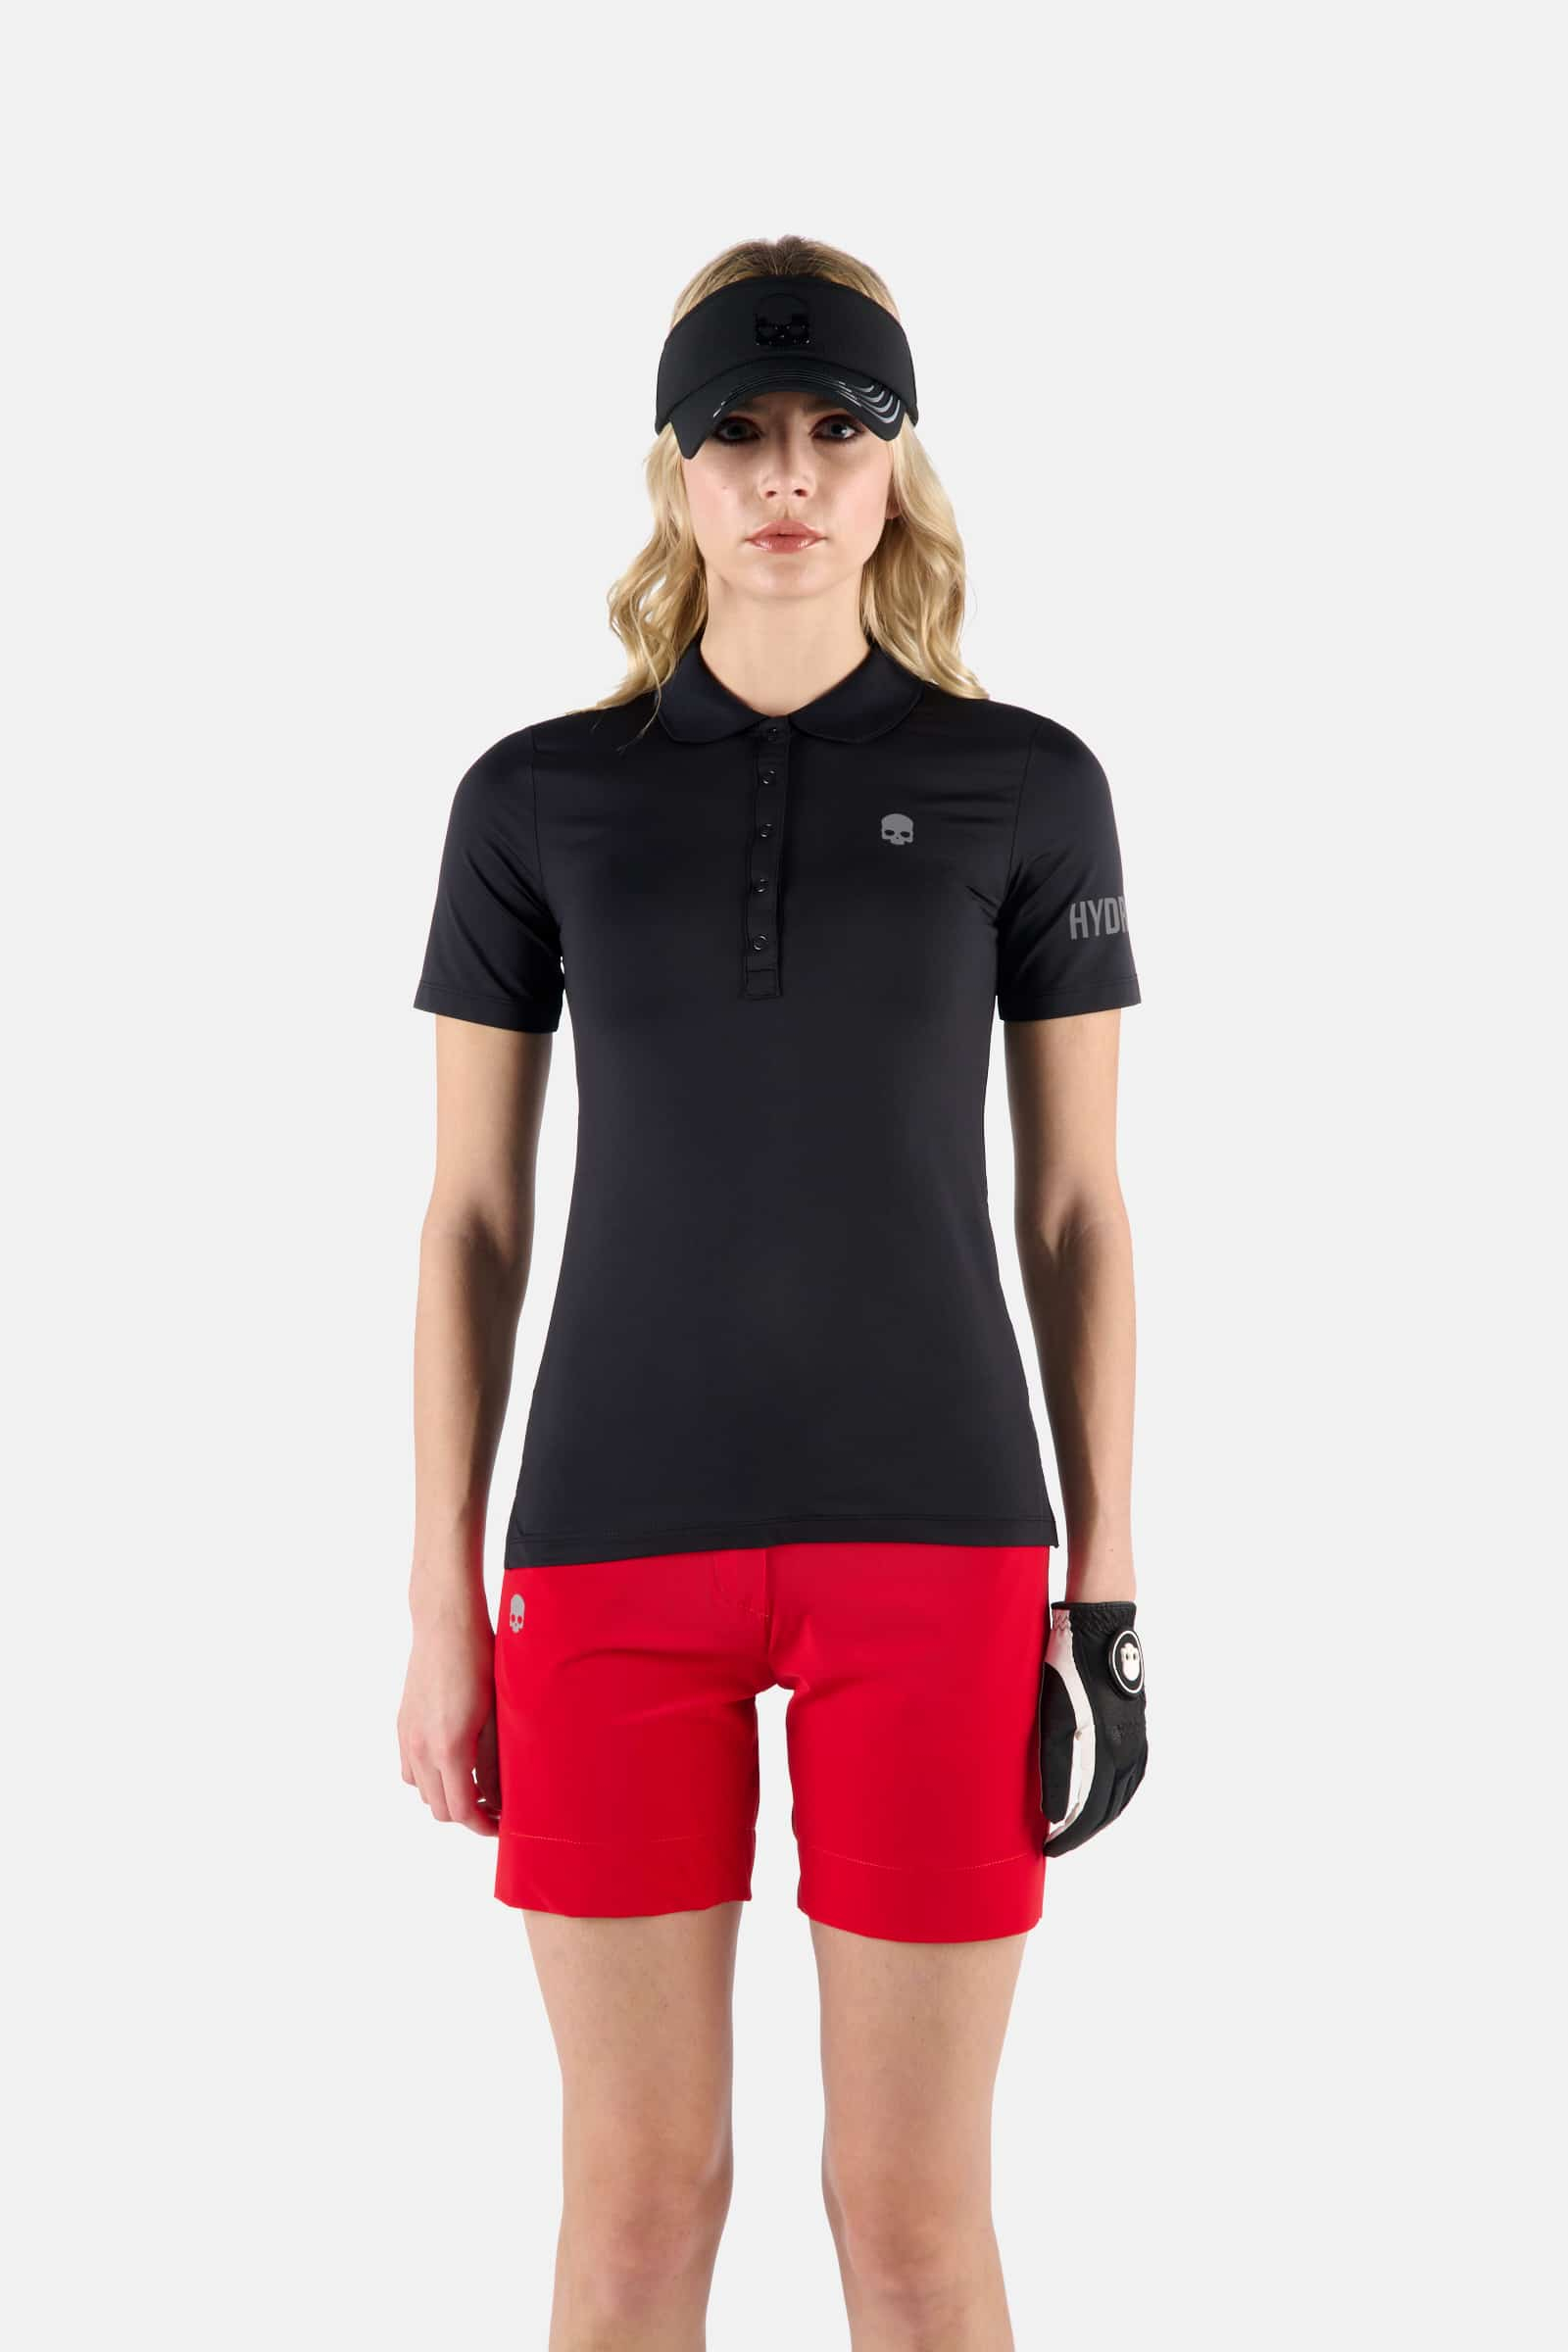 OVER GAME GOLF POLO - Apparel - Outlet Hydrogen - Luxury Sportwear